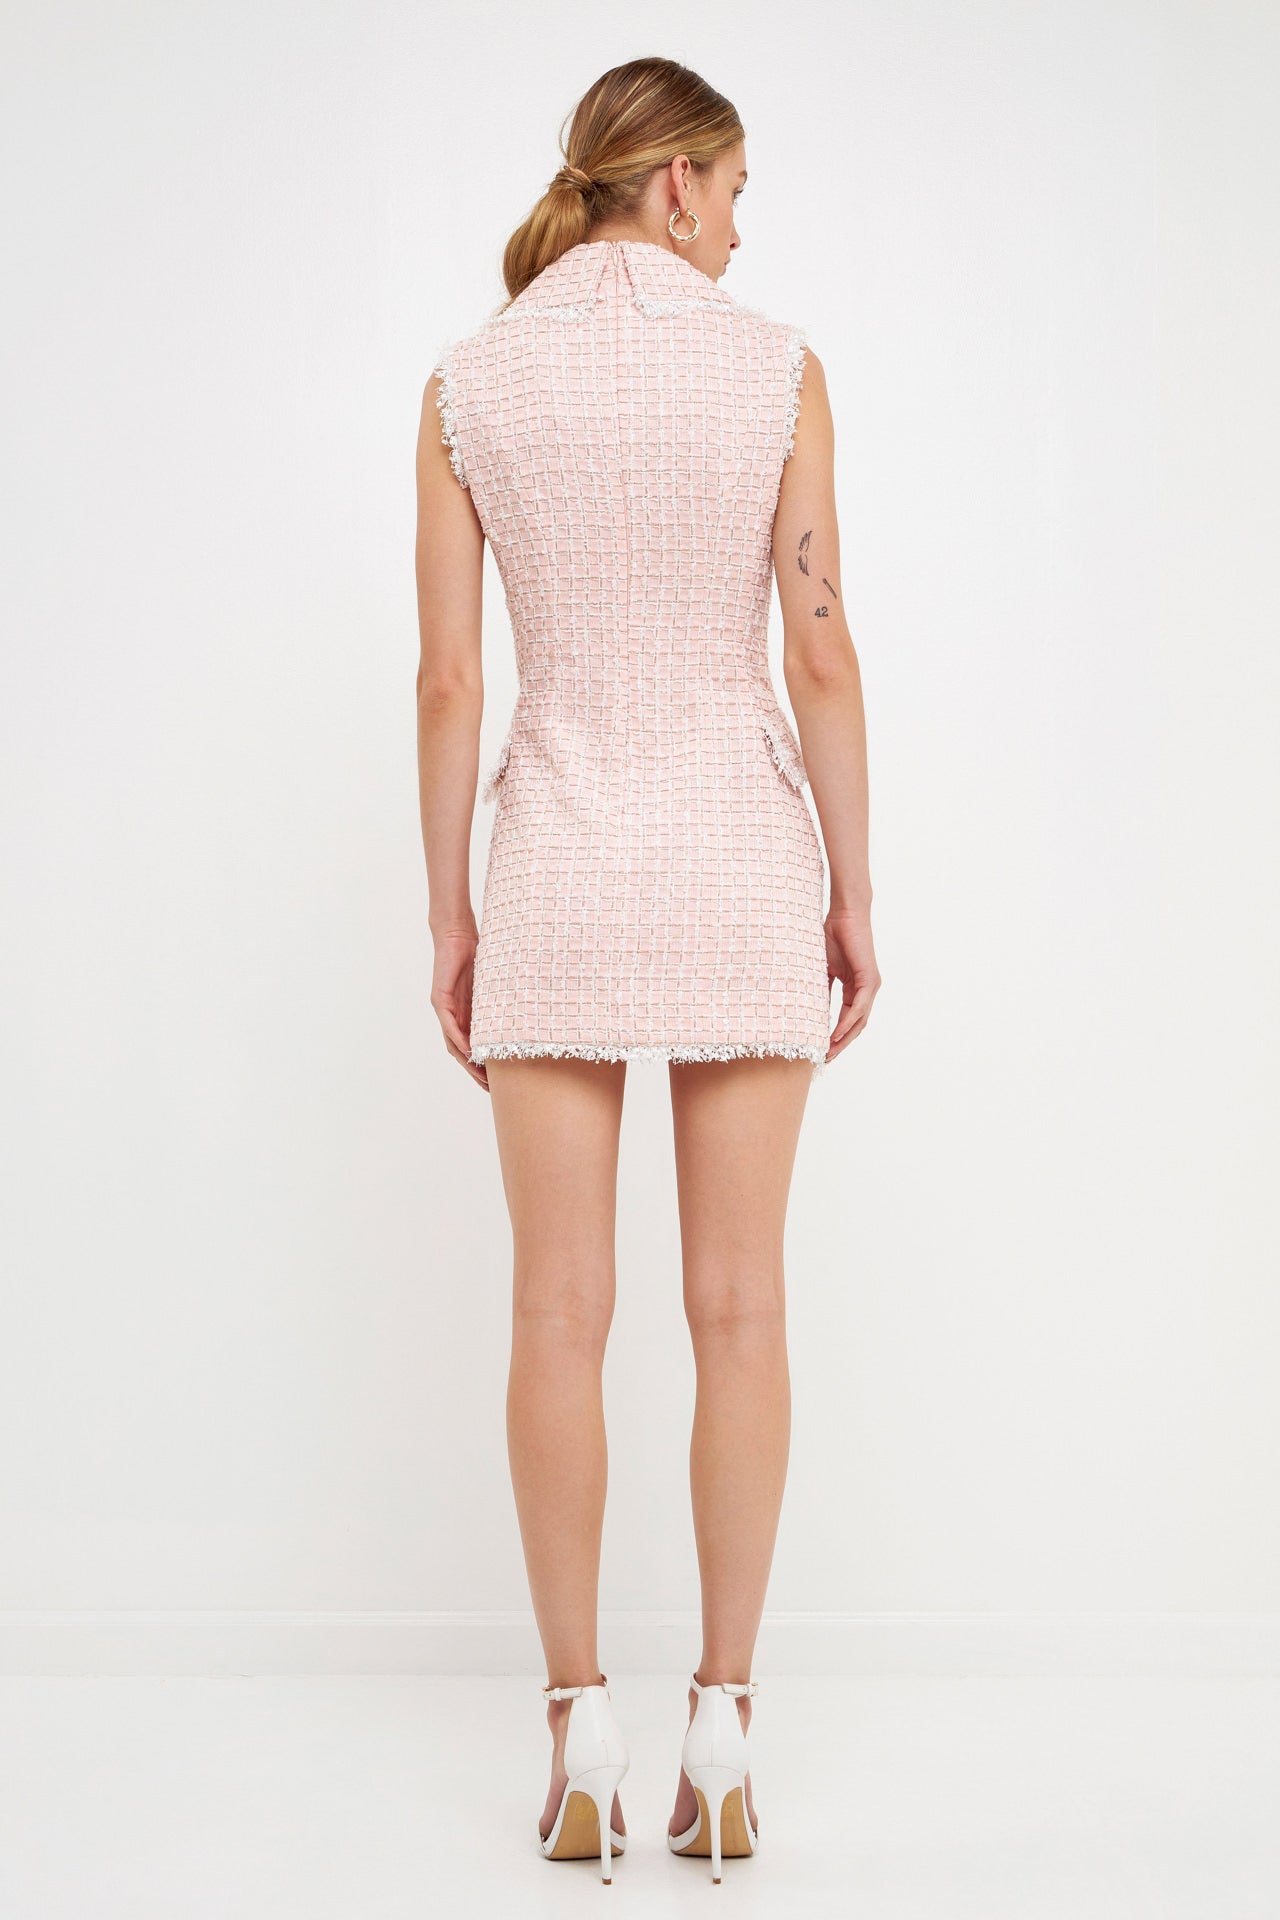 ENDLESS ROSE - Premium Check Tweed Mini Dress - DRESSES available at Objectrare